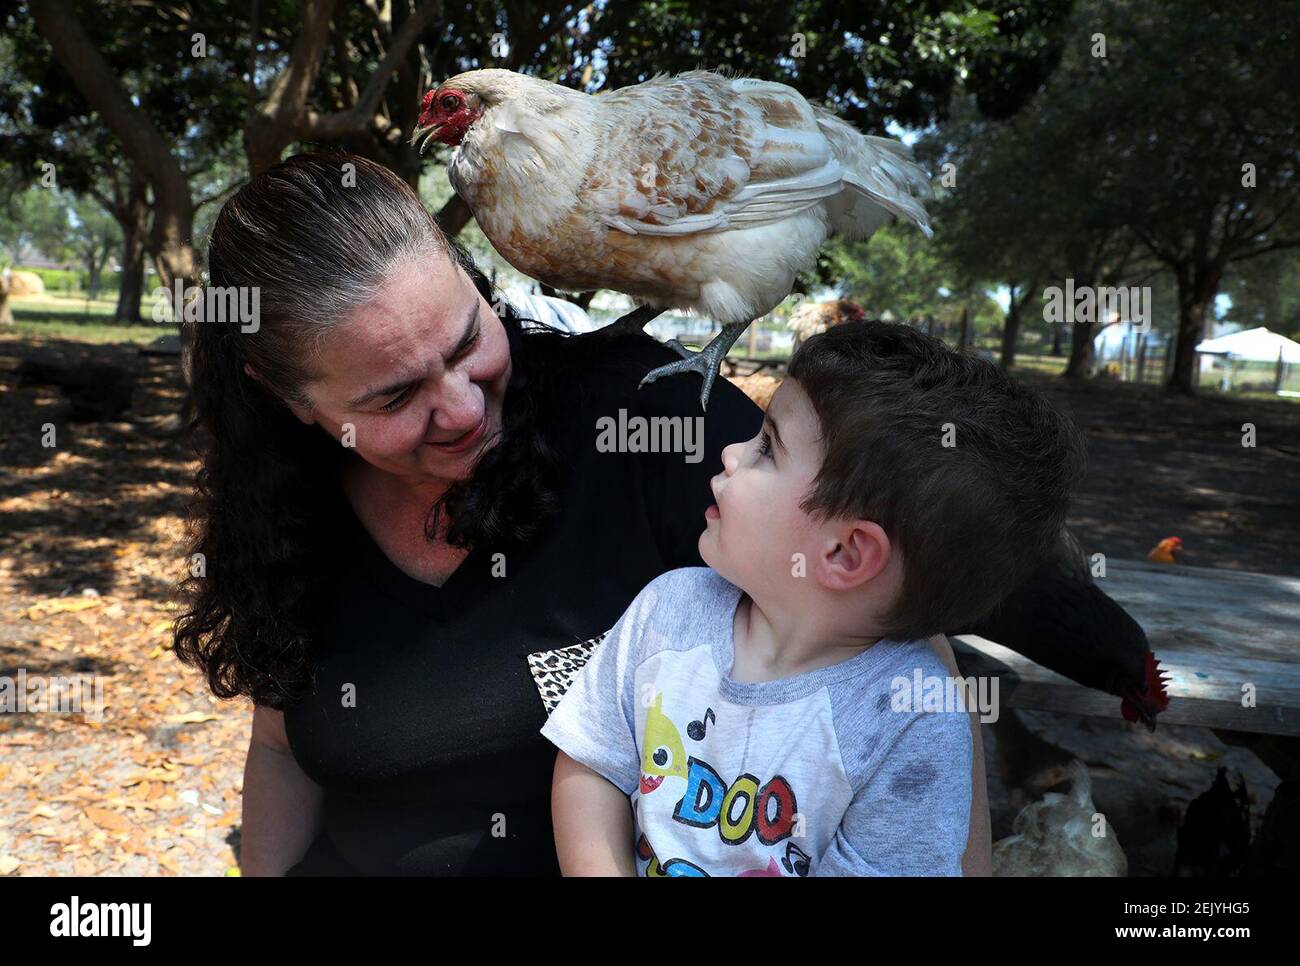 Carter Celona, 2, and his grandmother Lisa Ceruti, of Davie, sit among a flock of chickens during a visit to the Family Farm in Davie, Florida. People have been buying up chicks and chickens for various reasons, including the Easter holiday since the COVID-19 pandemic started. (Carline Jean/South Florida Sun Sentinel/TNS) Stock Photo